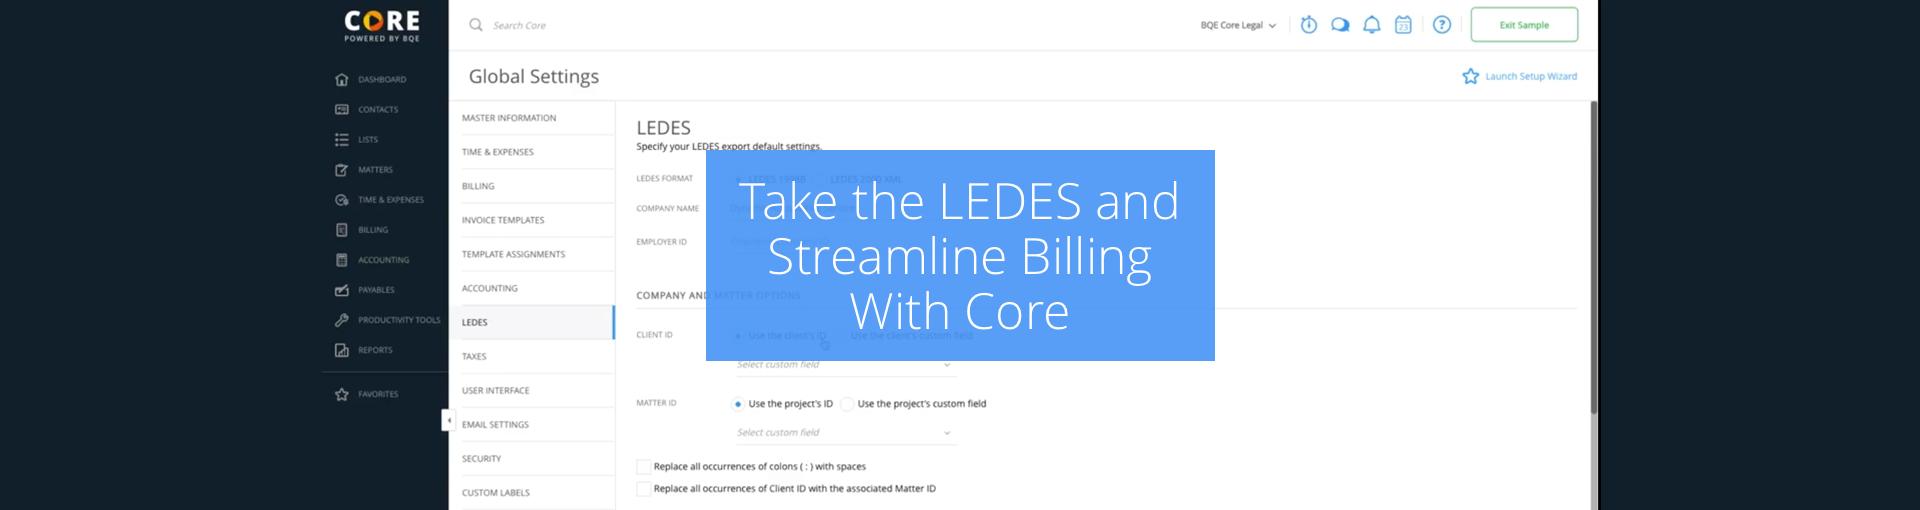 Take the LEDES and Streamline Billing With Core Featured Image